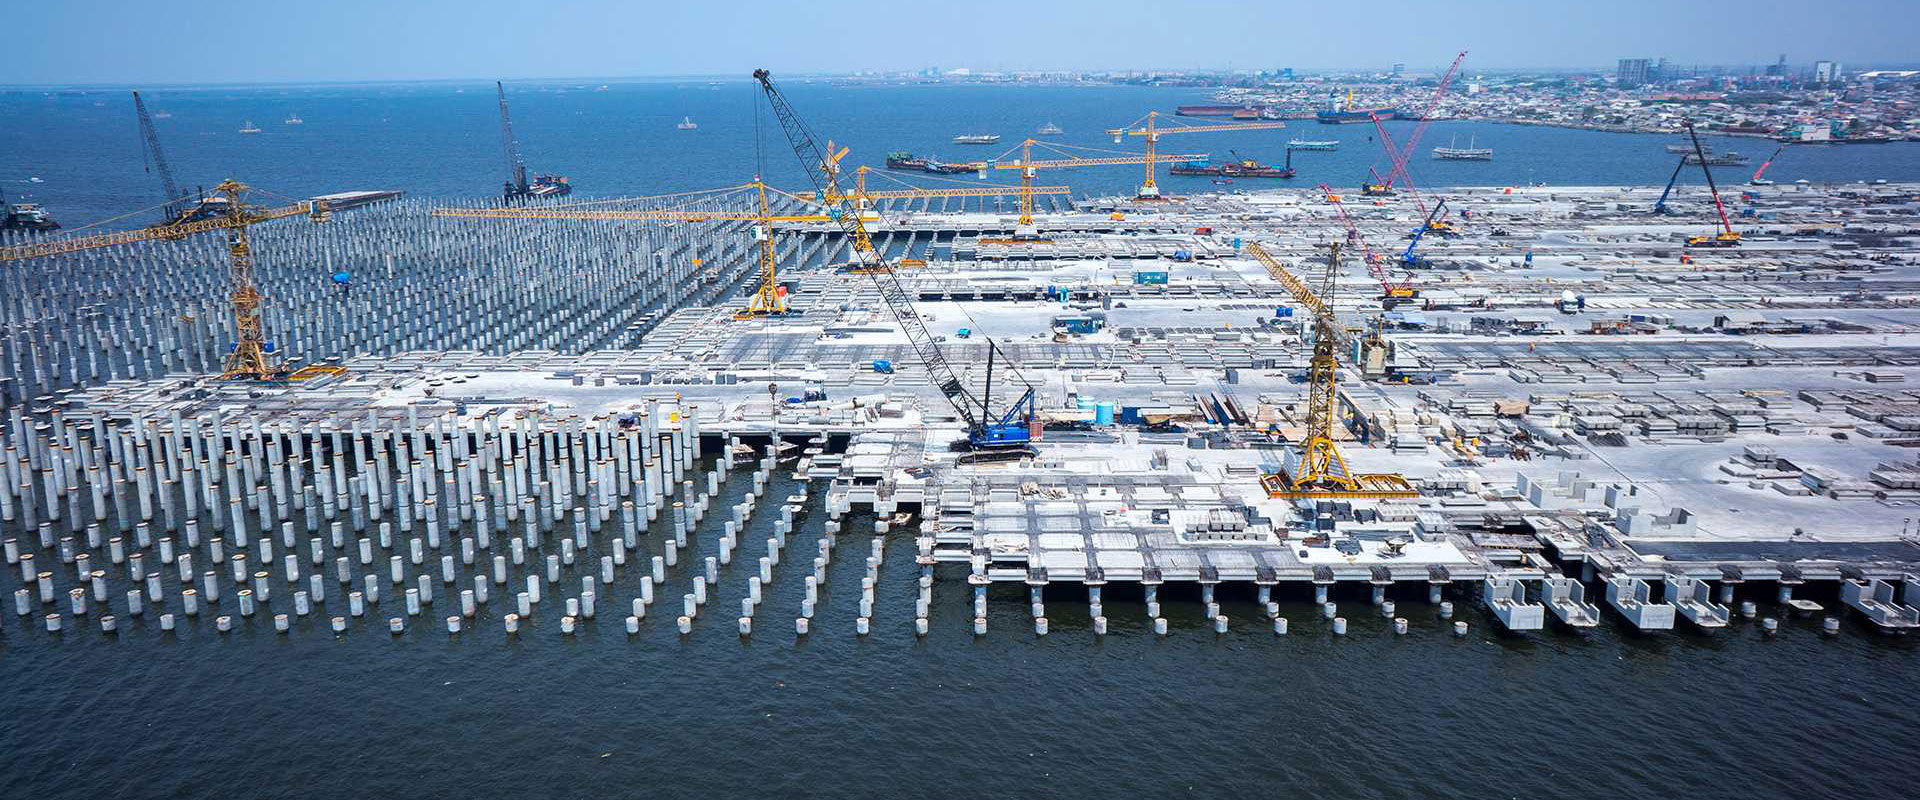 Cutting edge maritime infrastructure featuring bustling ports and advanced logistics facilities